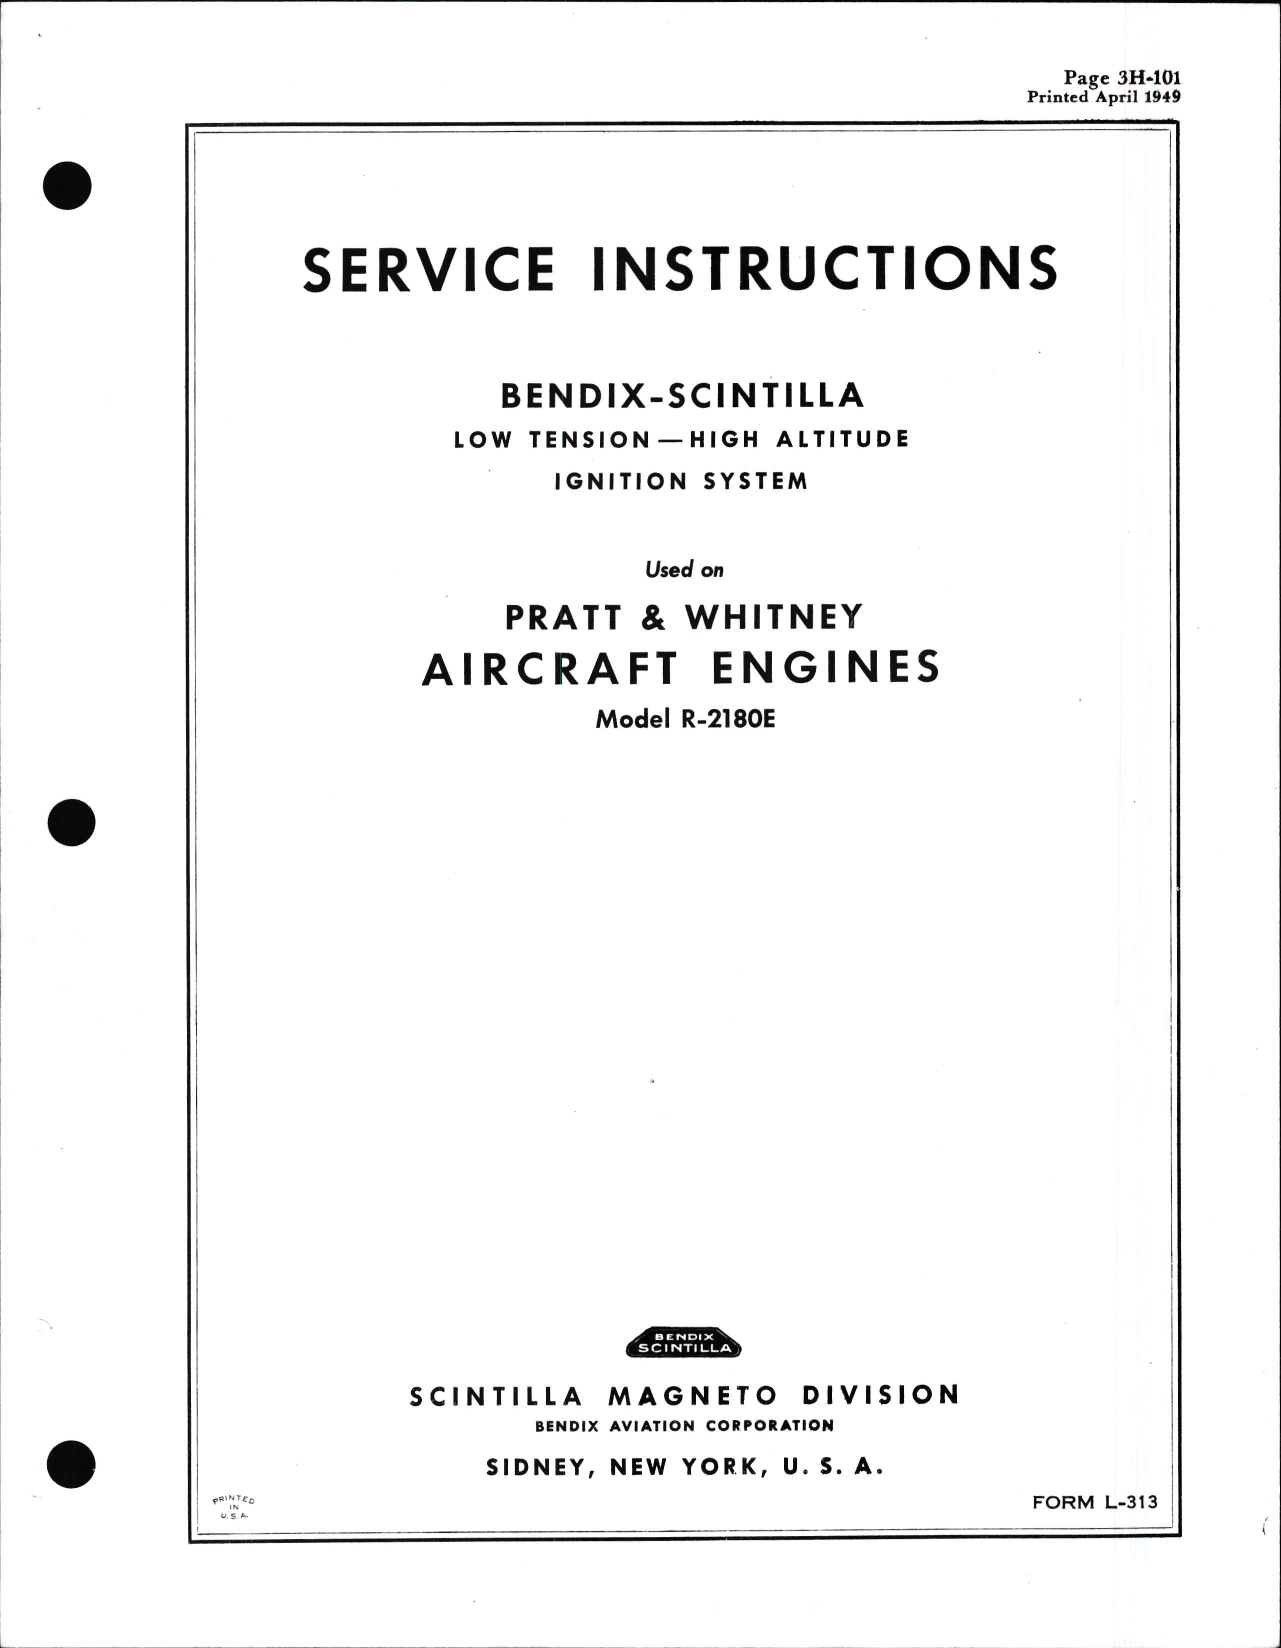 Sample page 1 from AirCorps Library document: Service Instructions for Bendix-Scintilla Low Tension - High Altitude Ignition for Pratt & Whitney R-2180E